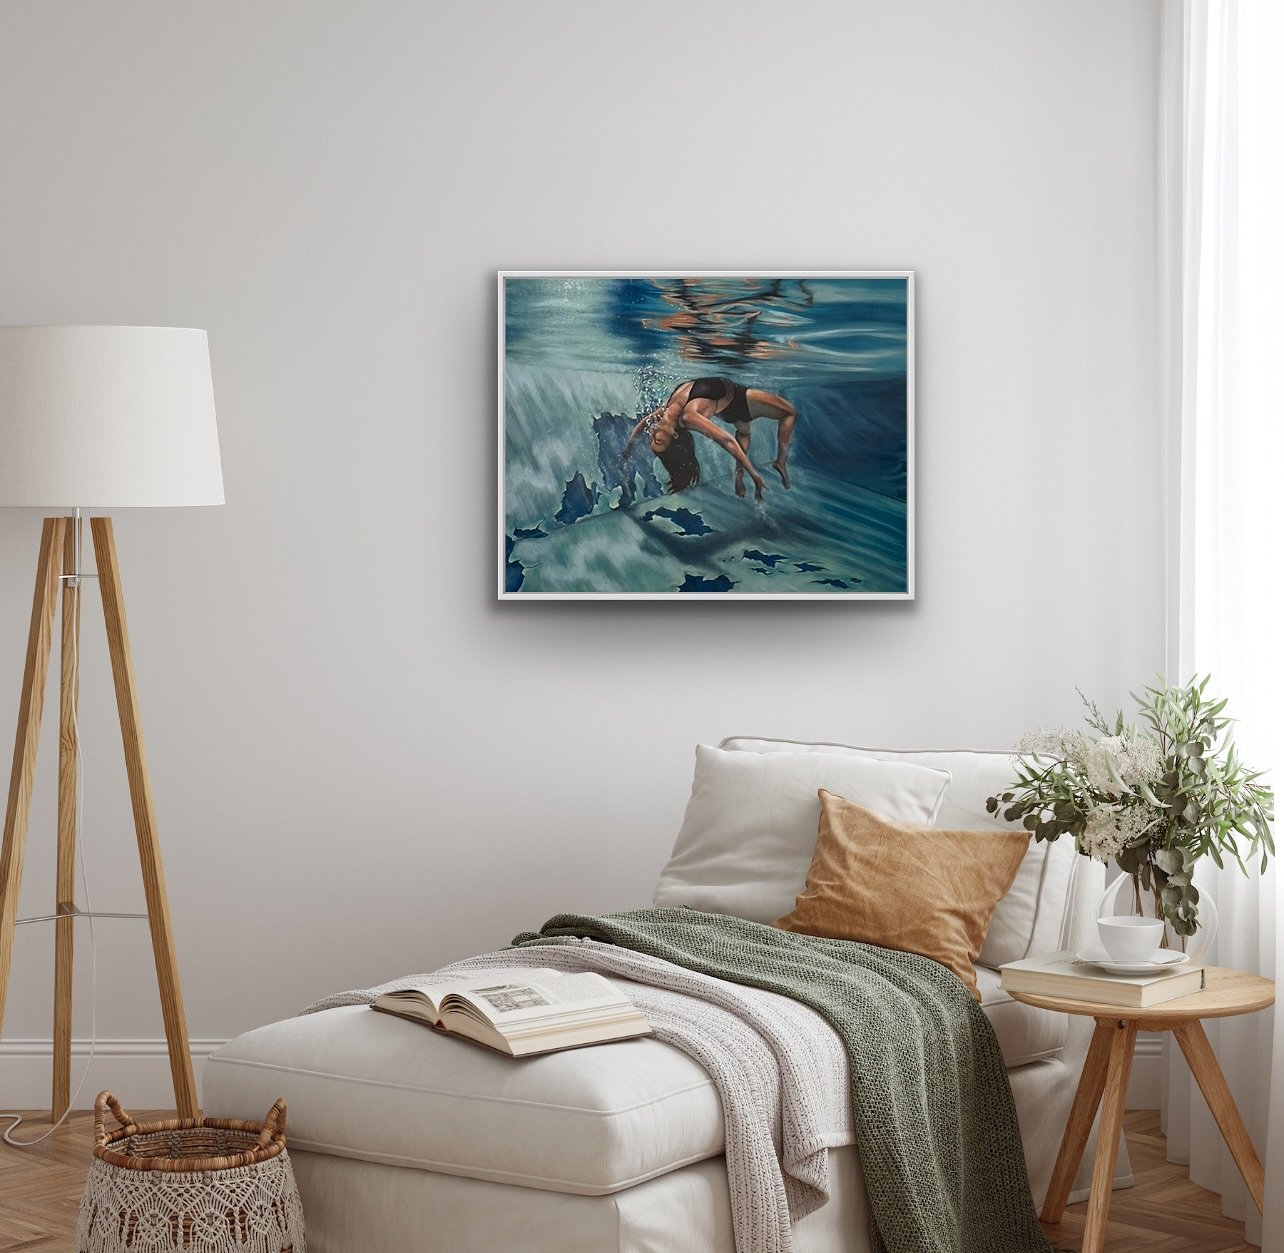 It always changes a work seeing it hanging in a room. 

&ldquo;Suspended balance&rdquo; oil on aluminum 20&rdquo;x30&rdquo;
Available DM if interested 

.

.
#art #artist #artinrooms #artinsitu #livewithart #artcollector #underwater